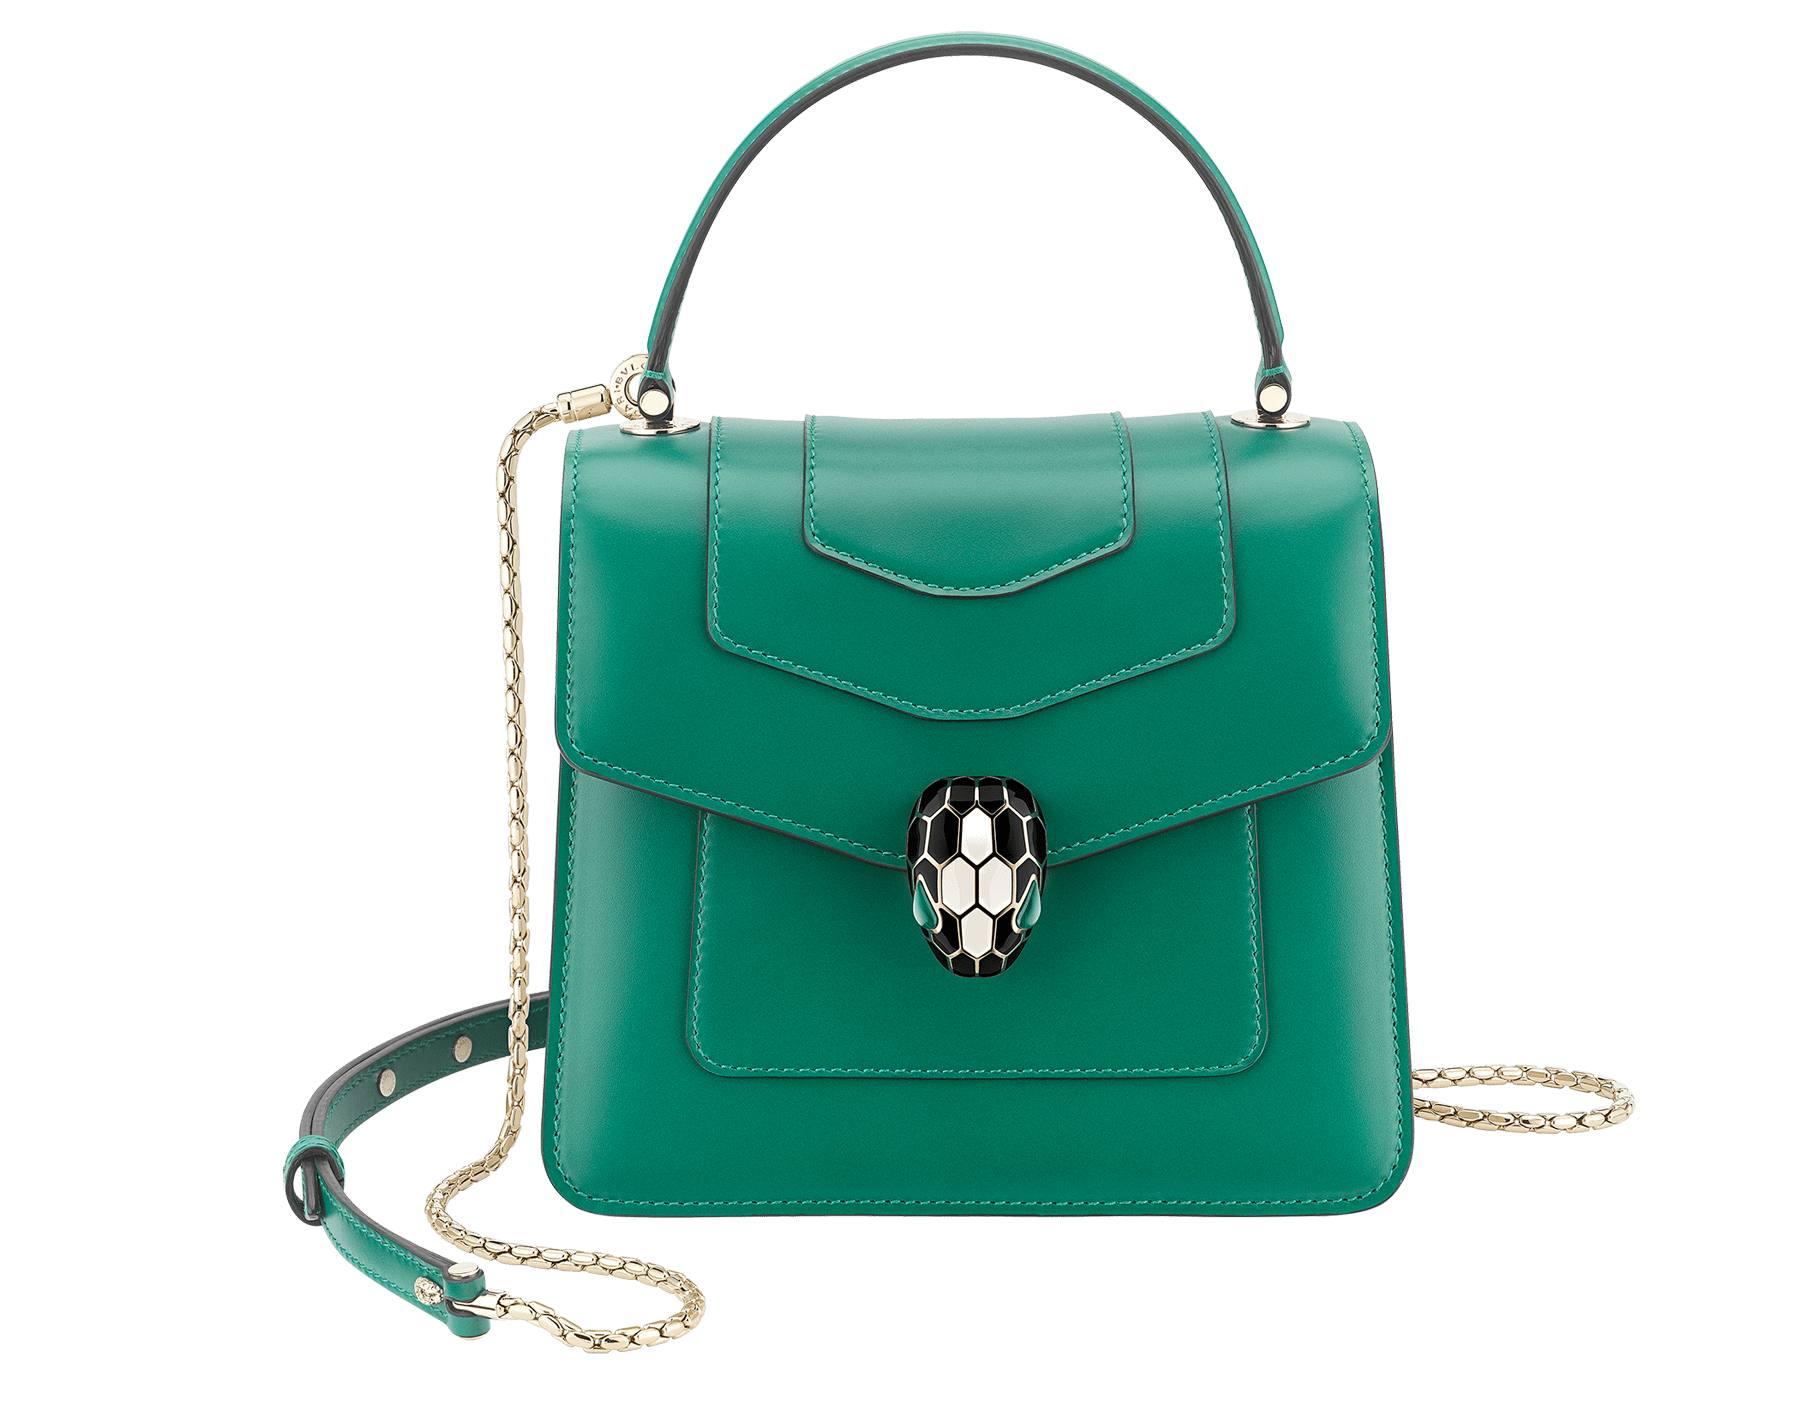 “Serpenti Forever ” top-handle bag in Lavender Amethyst lilac calf leather with Reef Coral red grosgrain inner lining. Iconic snakehead closure in light gold-plated brass embellished with black and white agate enamel and green malachite eyes. 1122-CLa image 1